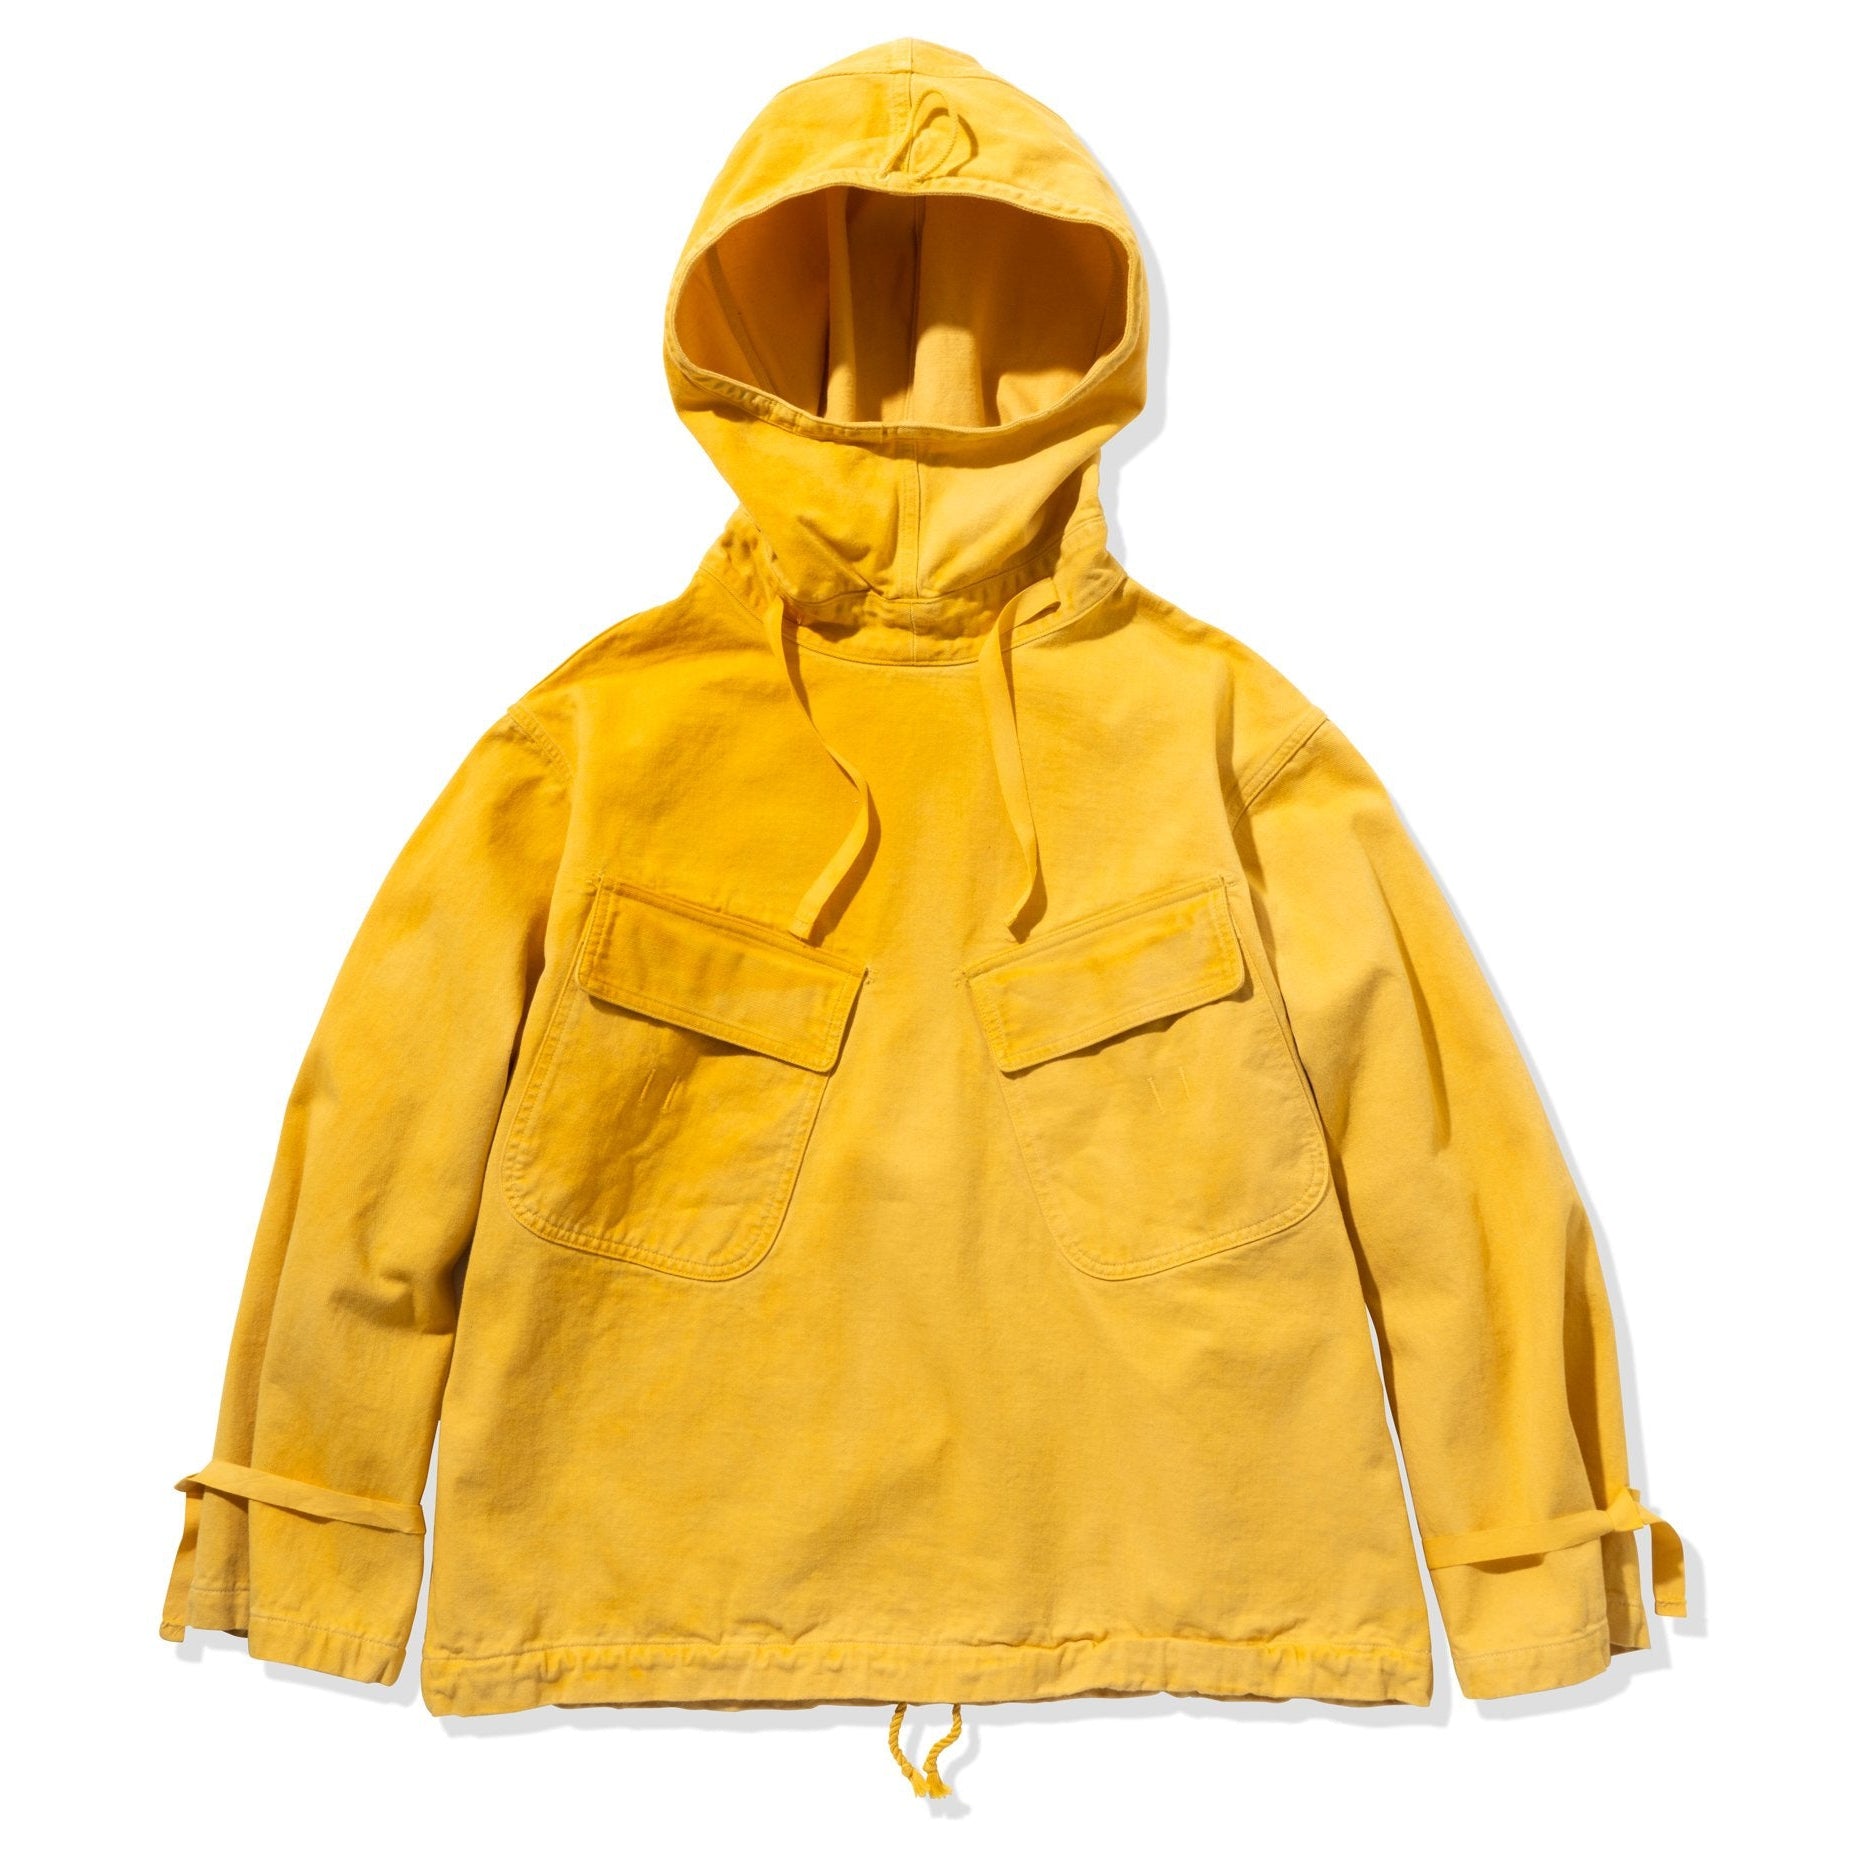 USN SALVAGE SMOCK PARKA (OVER-DYED) – The Real McCoy's